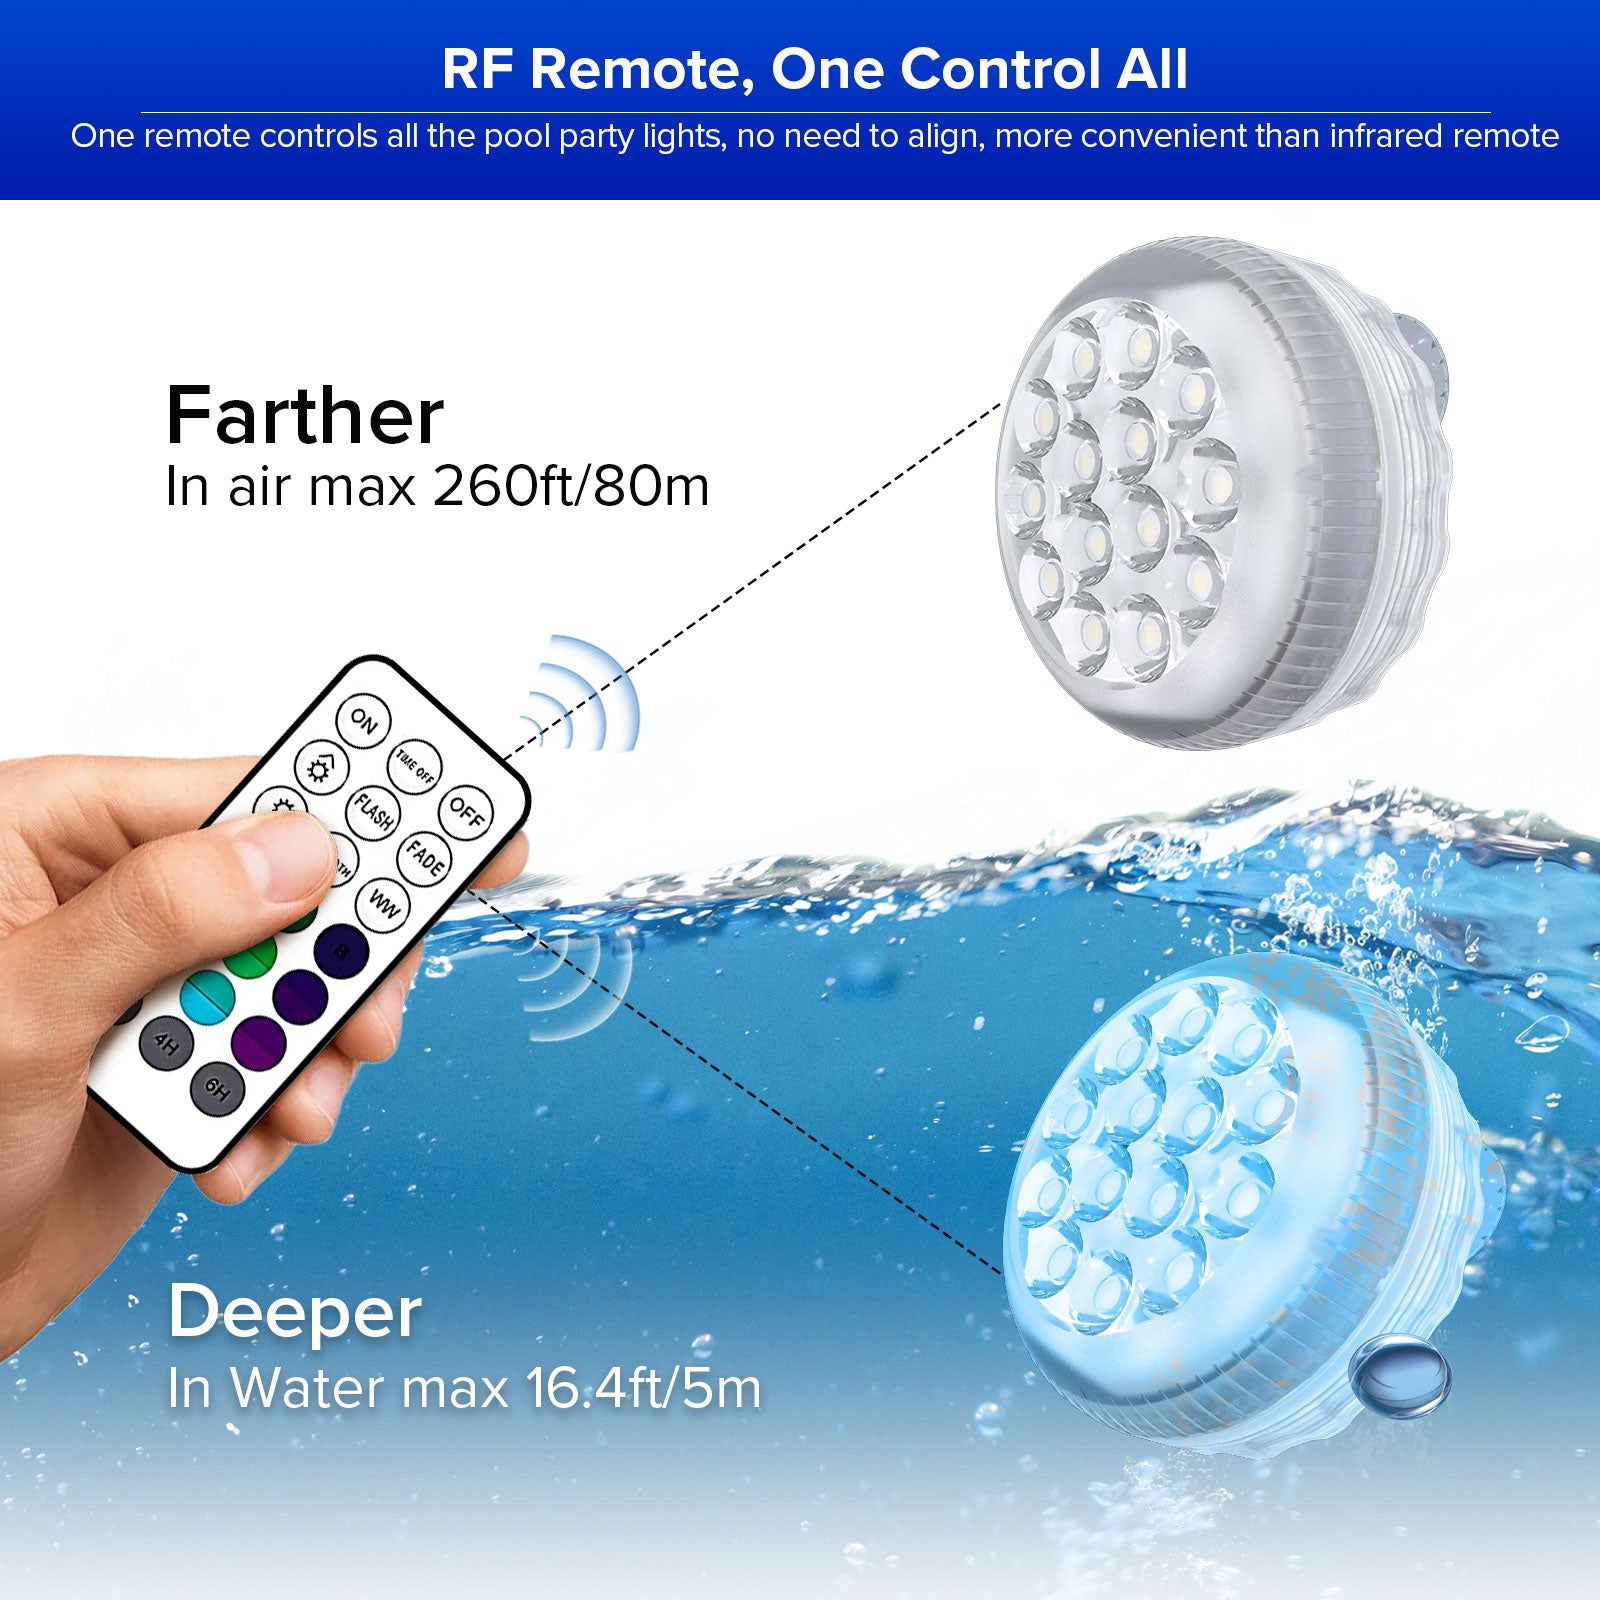 Upgraded RGB LED Submersible Pool Light (US ONLY)，one remote controls all the pool party lights, no need to align, more convenient than infrared remote.